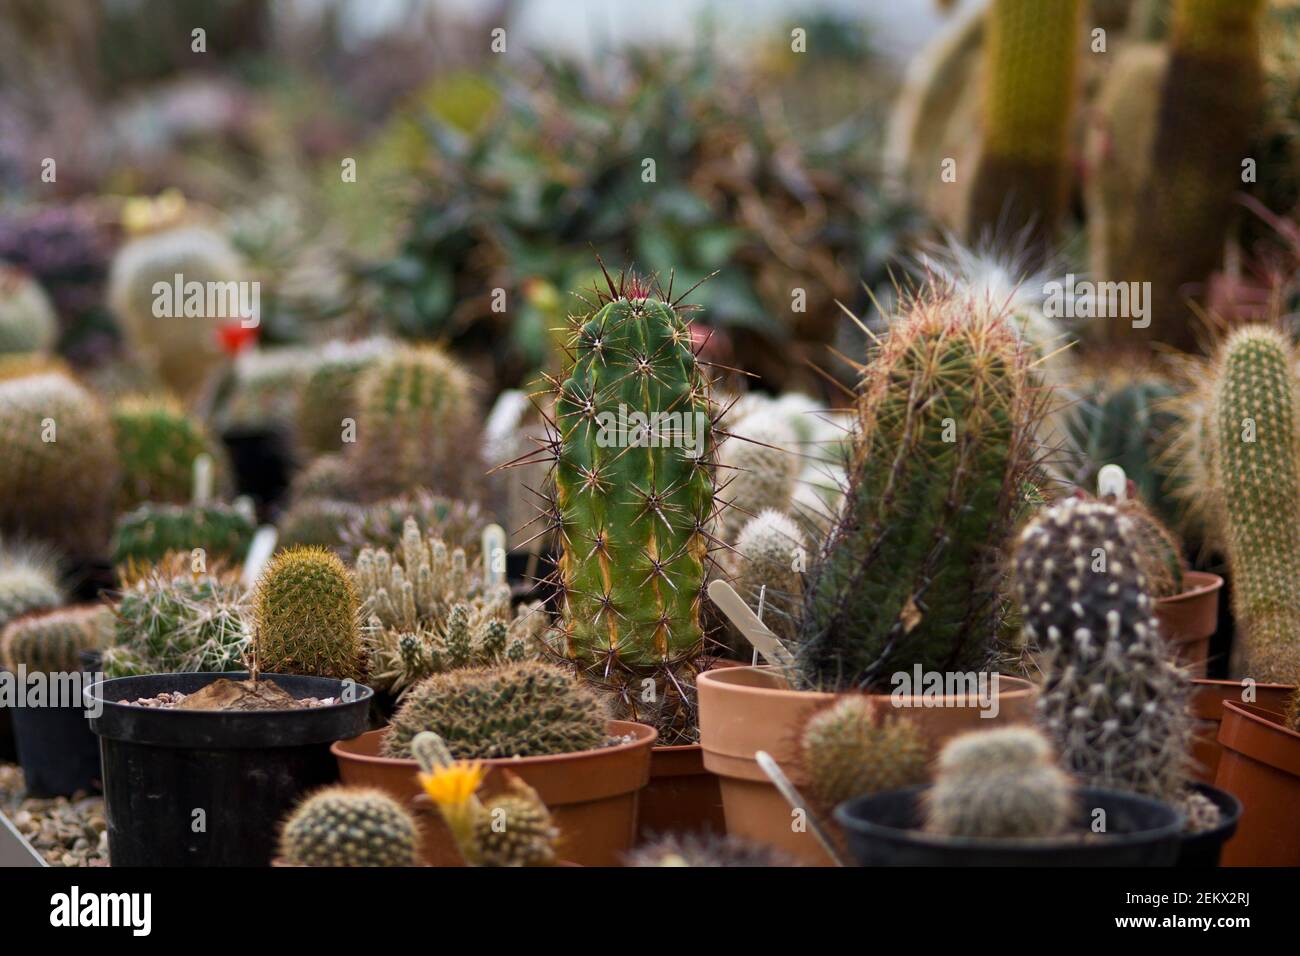 table top full of small pots of various cacti, cactus, dry, desert, arid, needles, don't touch, ouch, flowering, various, variety Stock Photo